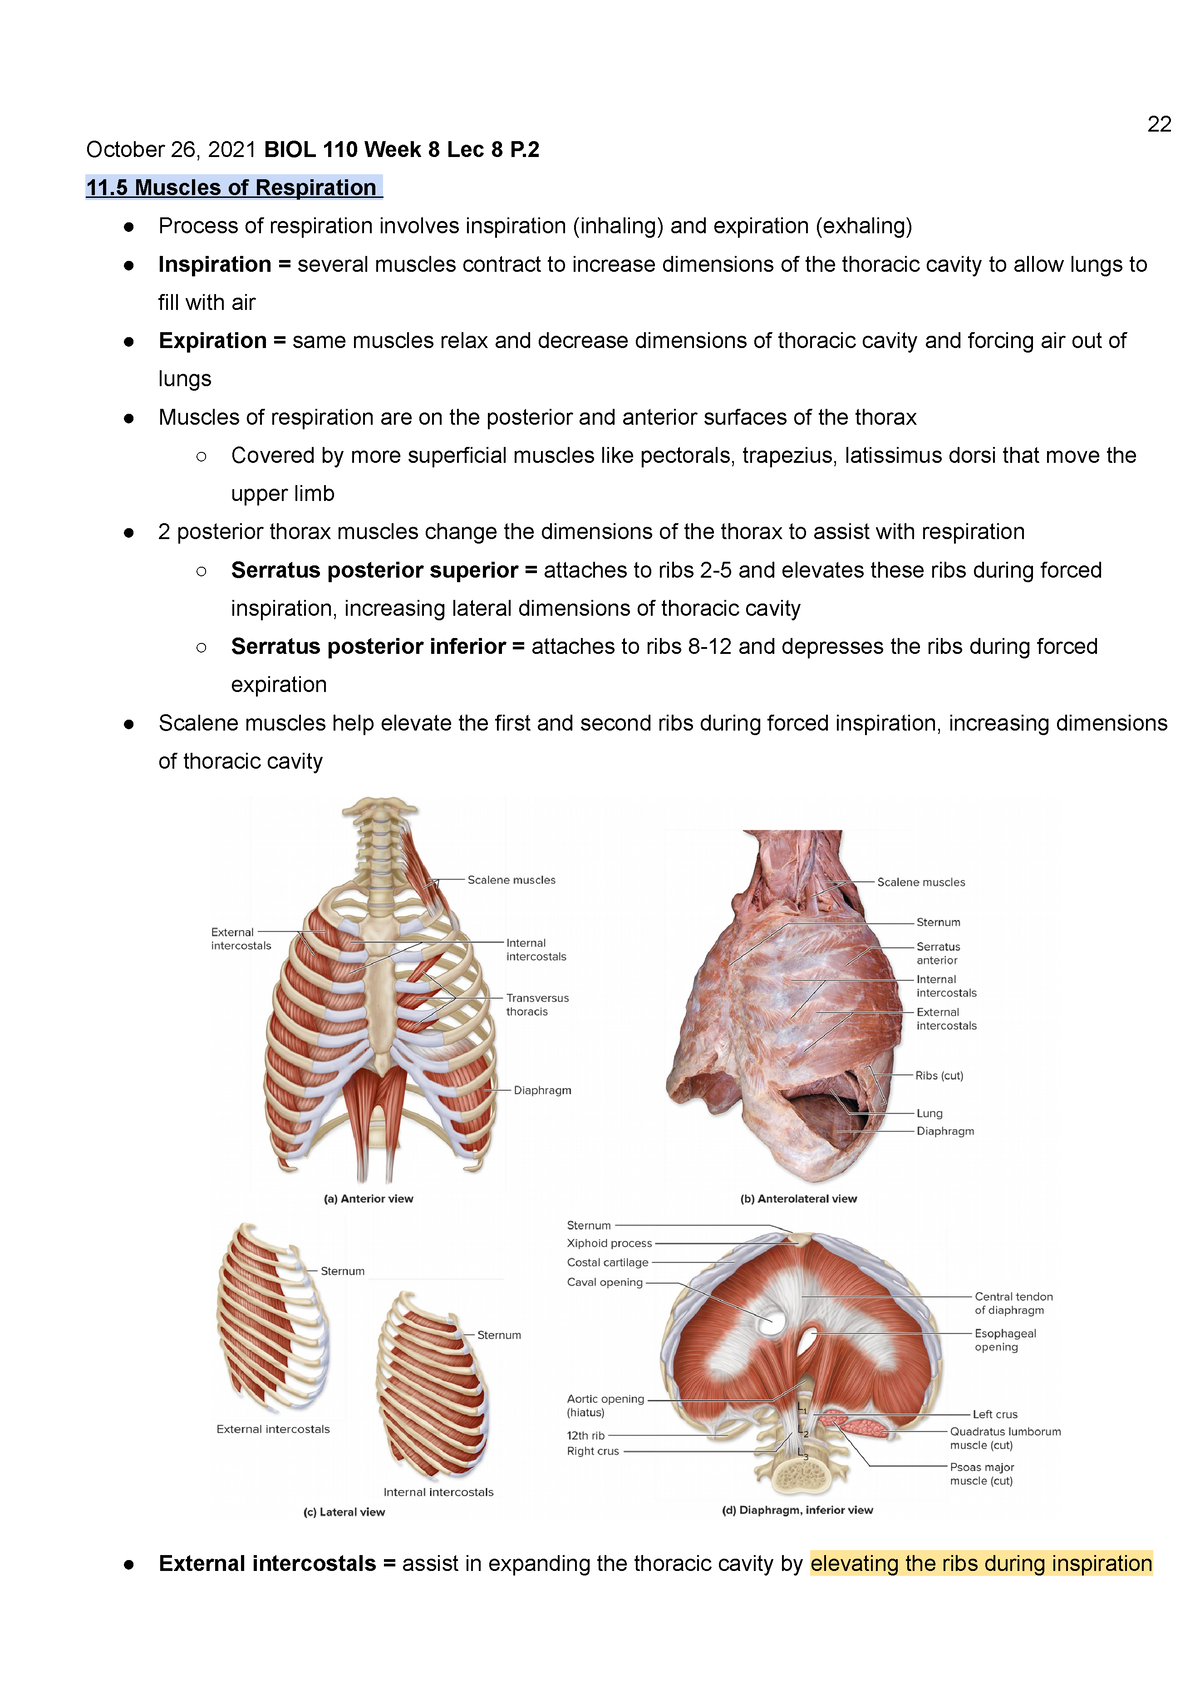 11.5 Axial muscles of the abdominal wall and thorax – Anatomy & Physiology